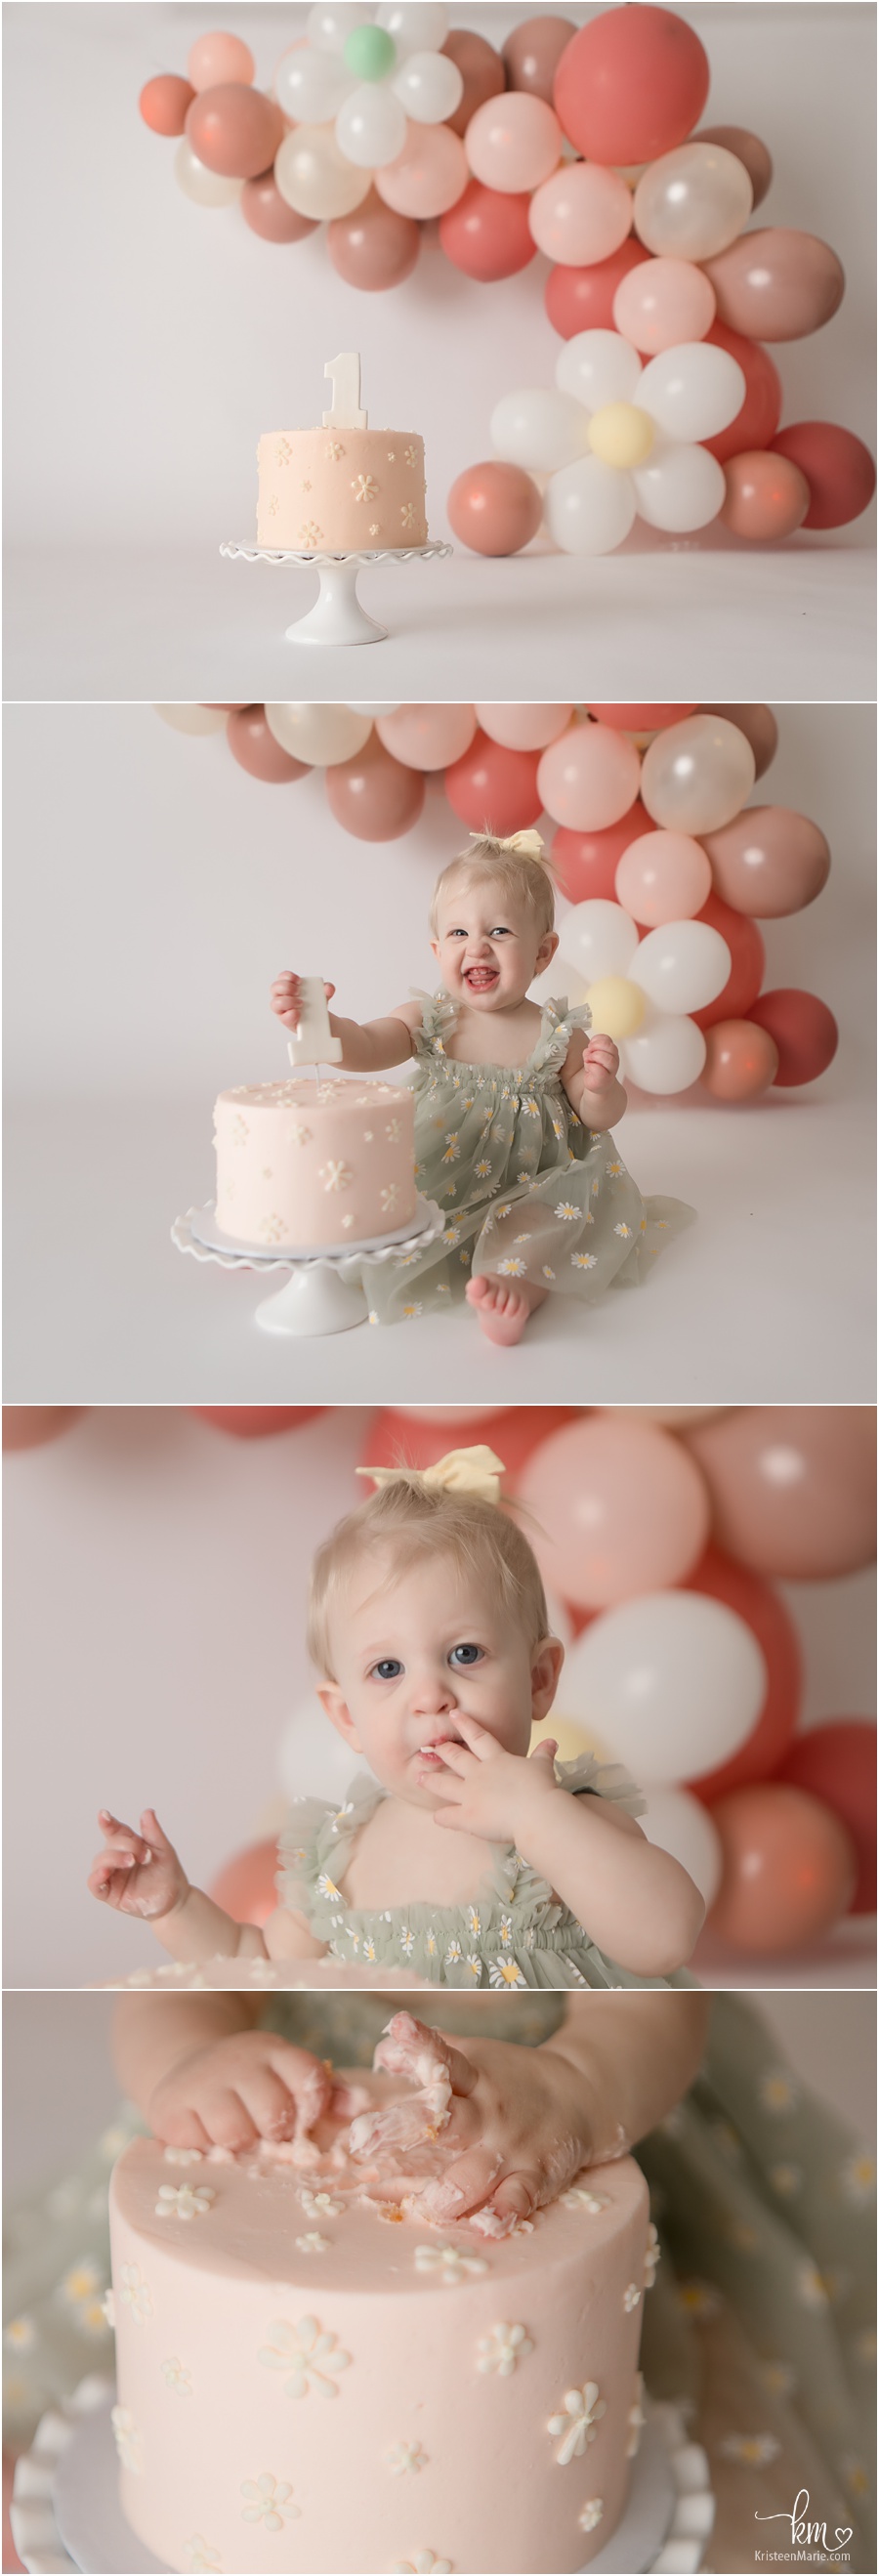 peach, yellow, and mint daisy cake smash for 1st birthday